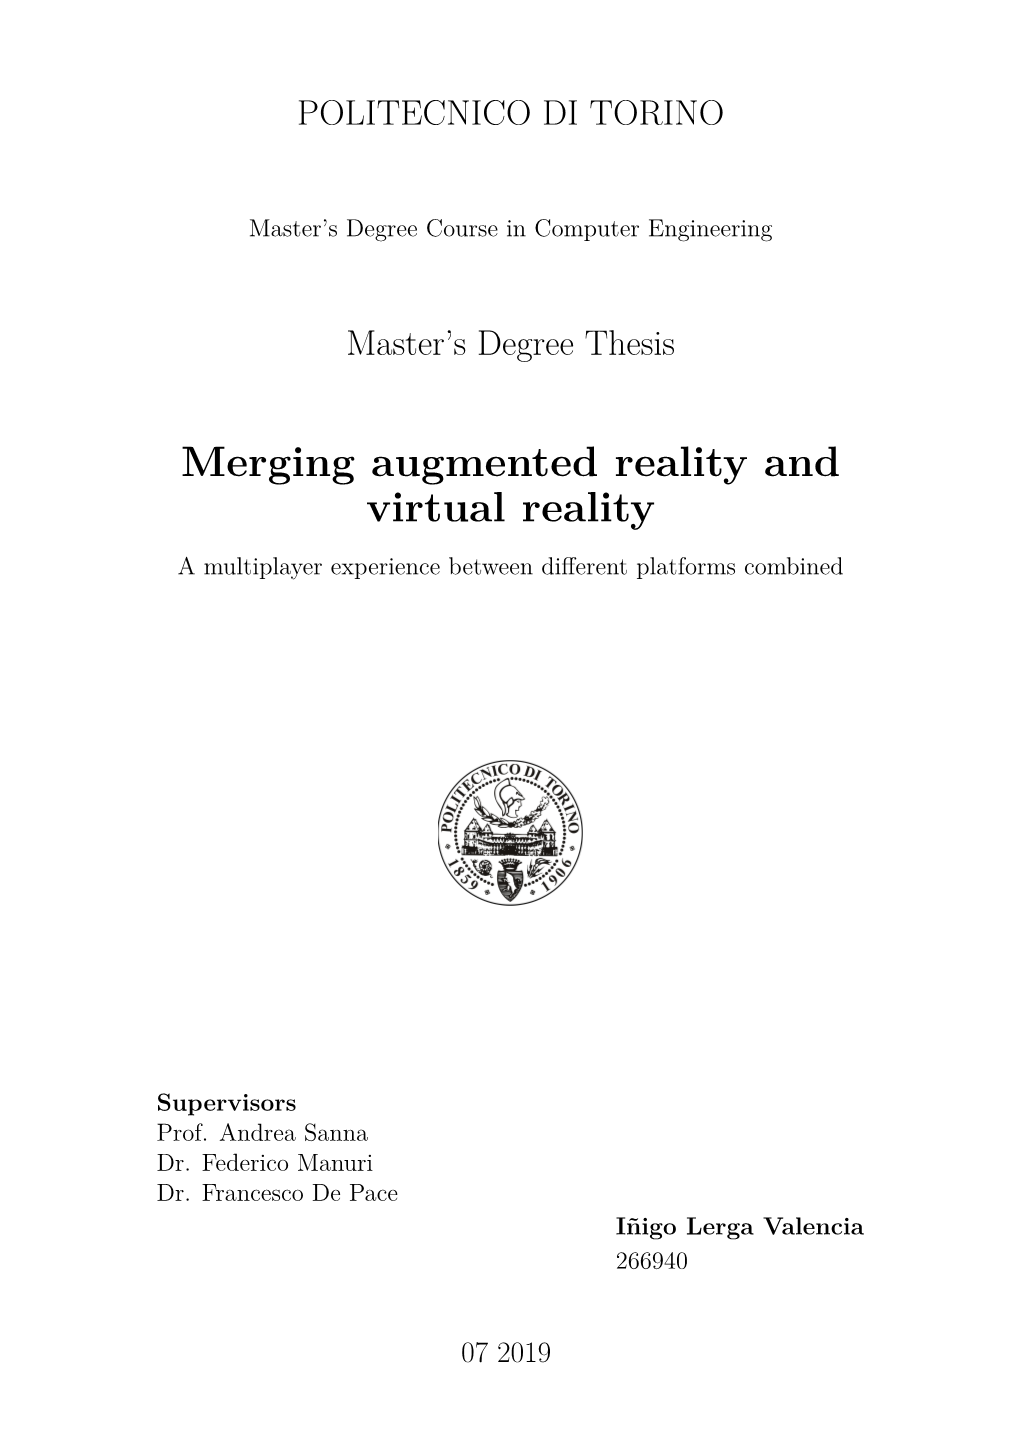 Merging Augmented Reality and Virtual Reality